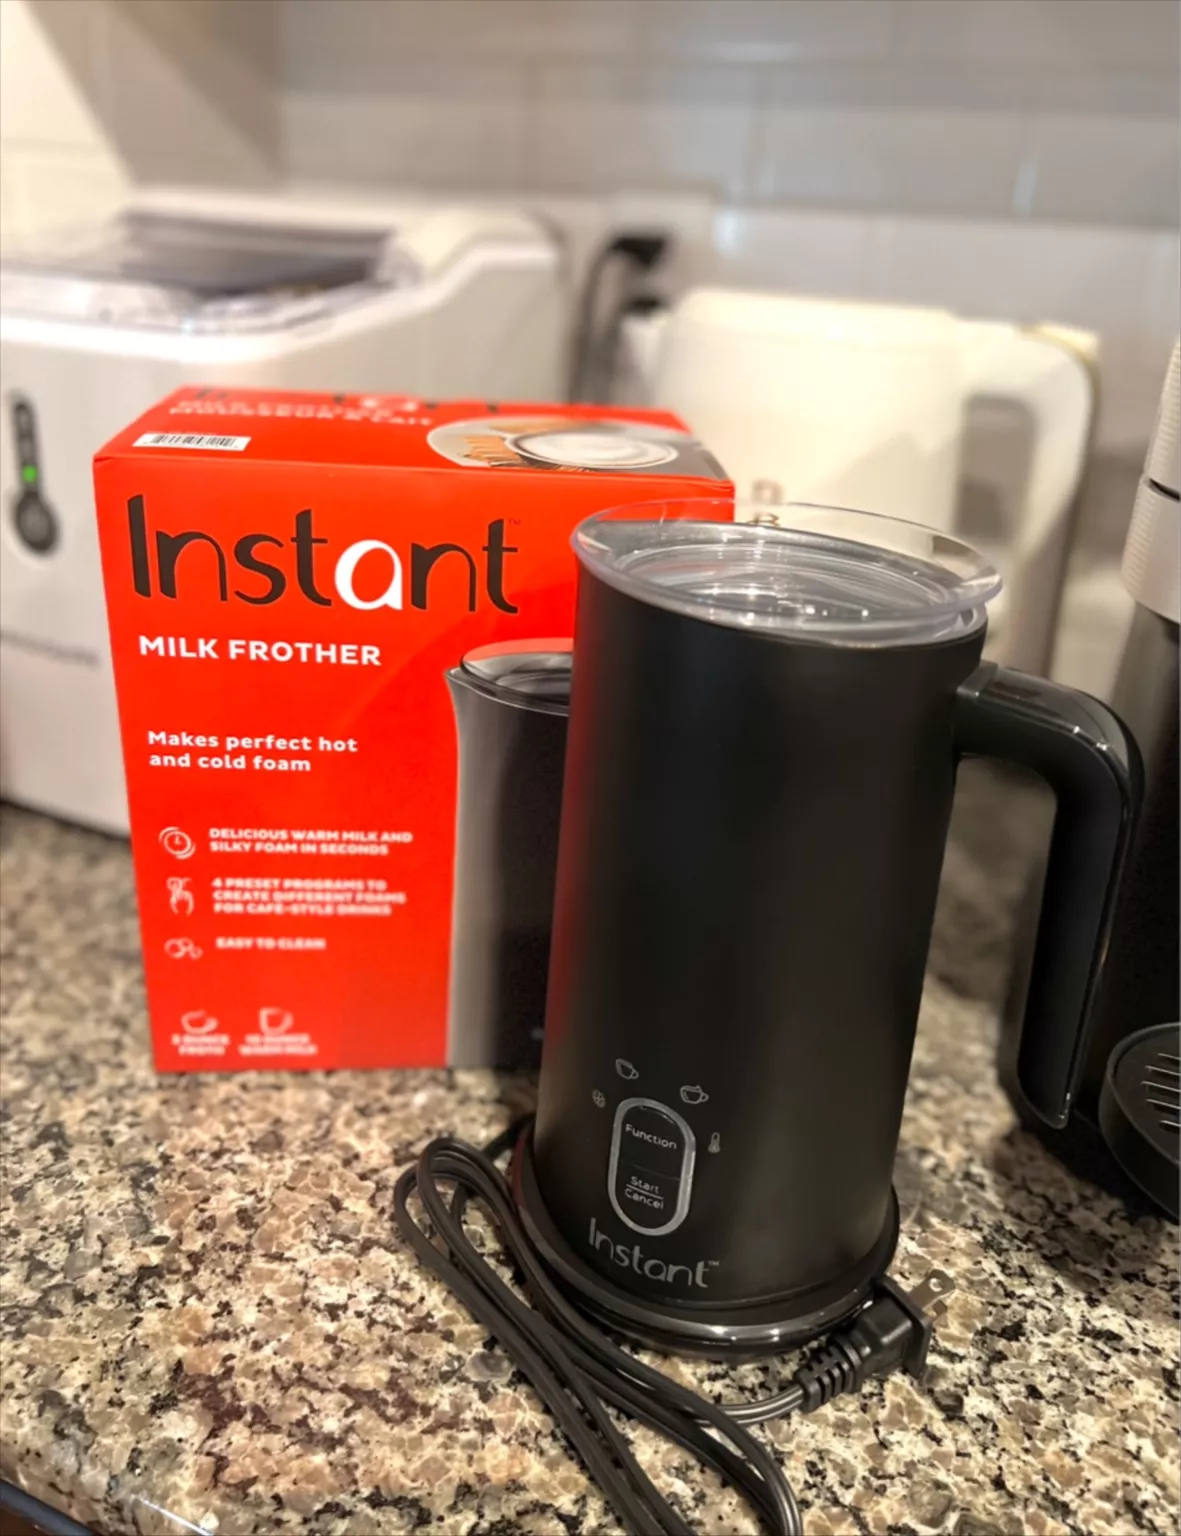 Is the Instant Milk Frother easy to clean?